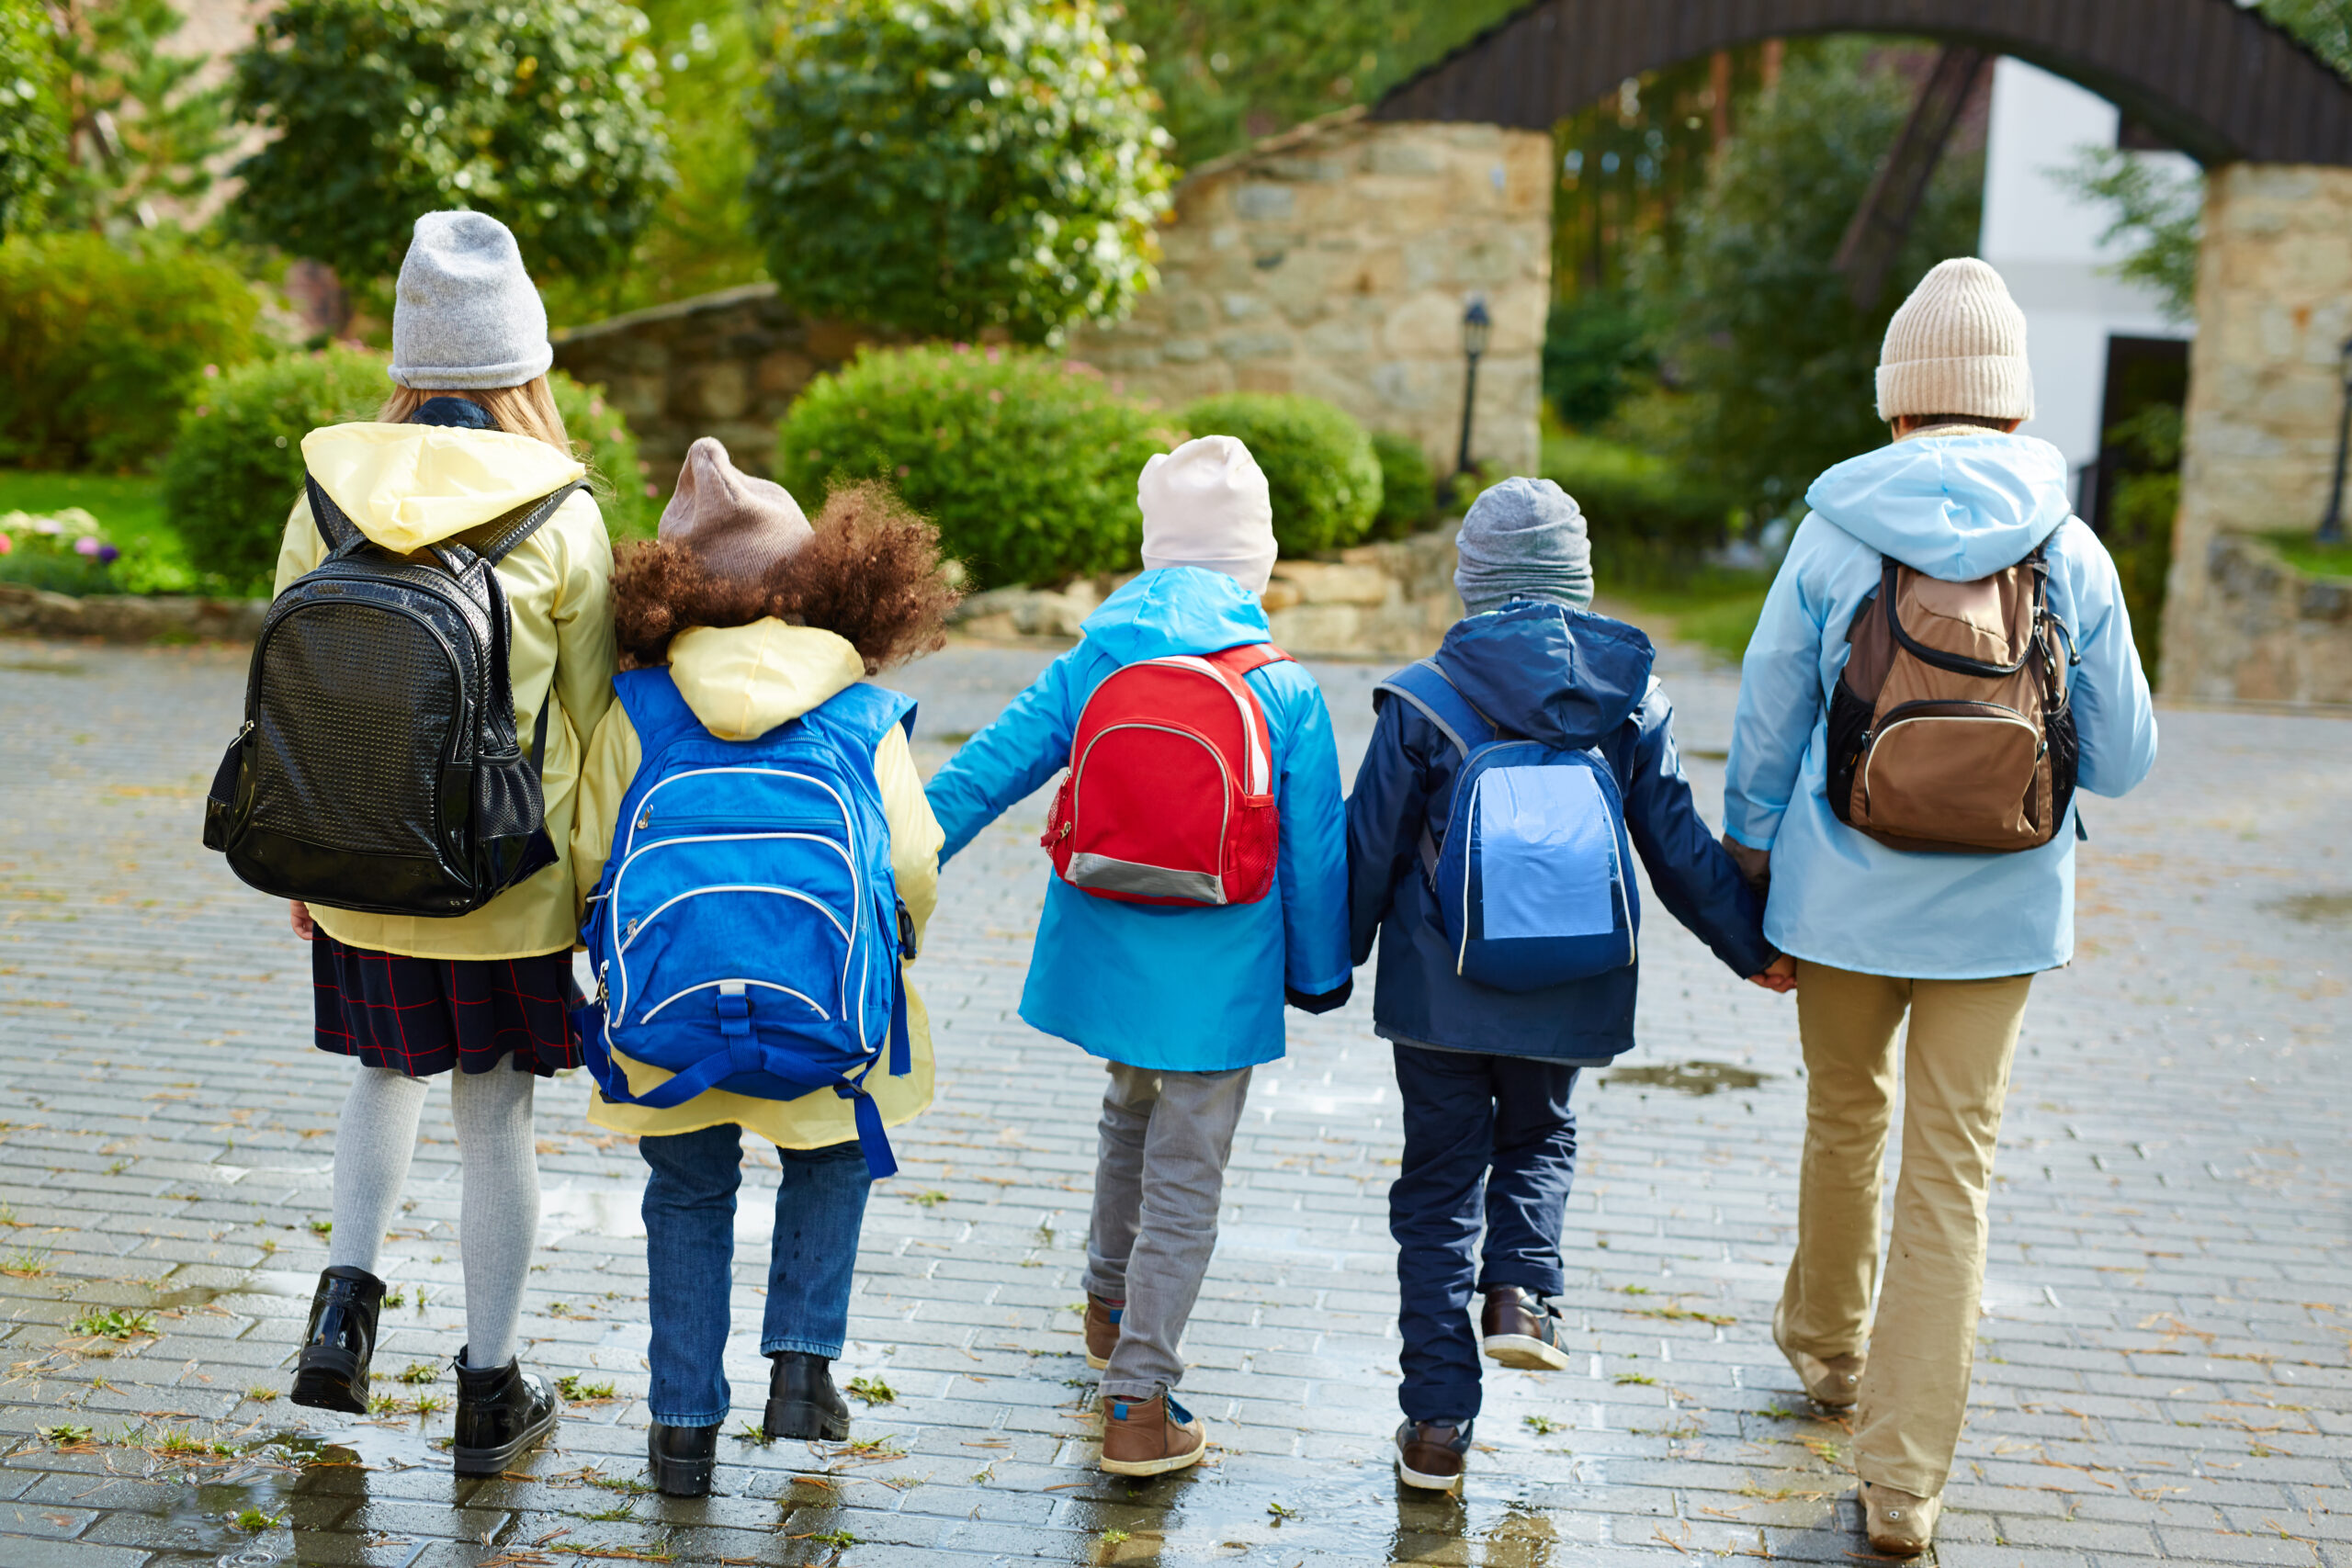 Five schoolkids in casualwear with rucksacks on backs holding by hands while going to school